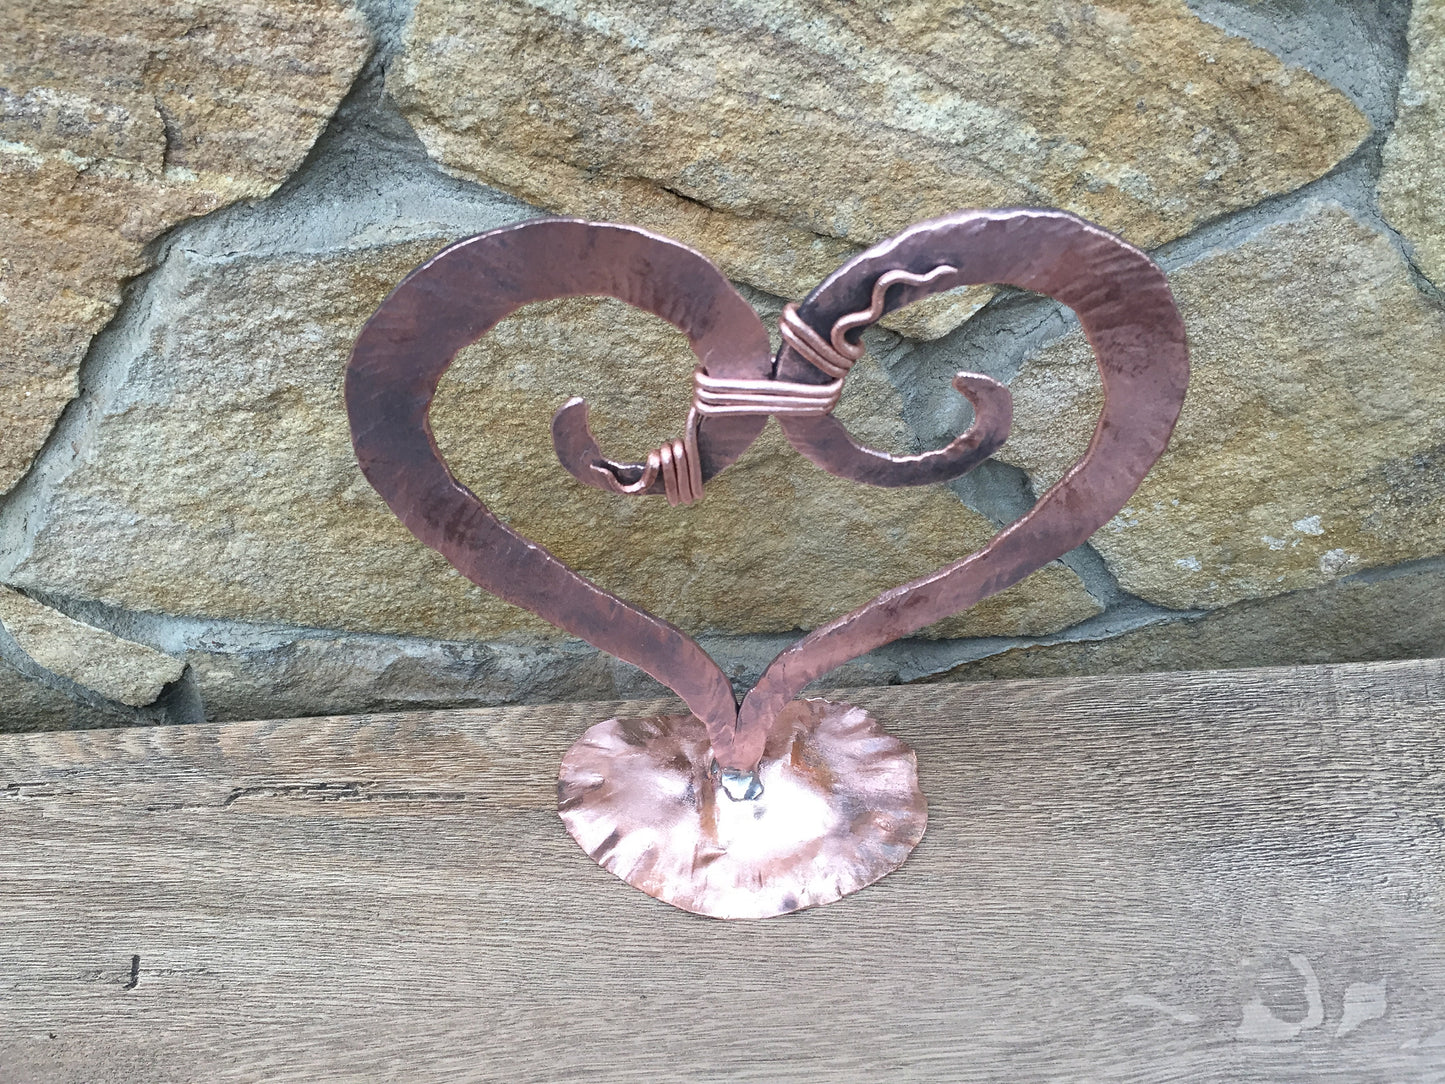 Copper anniversary gift, copper heart, 7 year anniversary, copper gift idea, 7th anniversary, copper art, copper engraved, copper jewelry